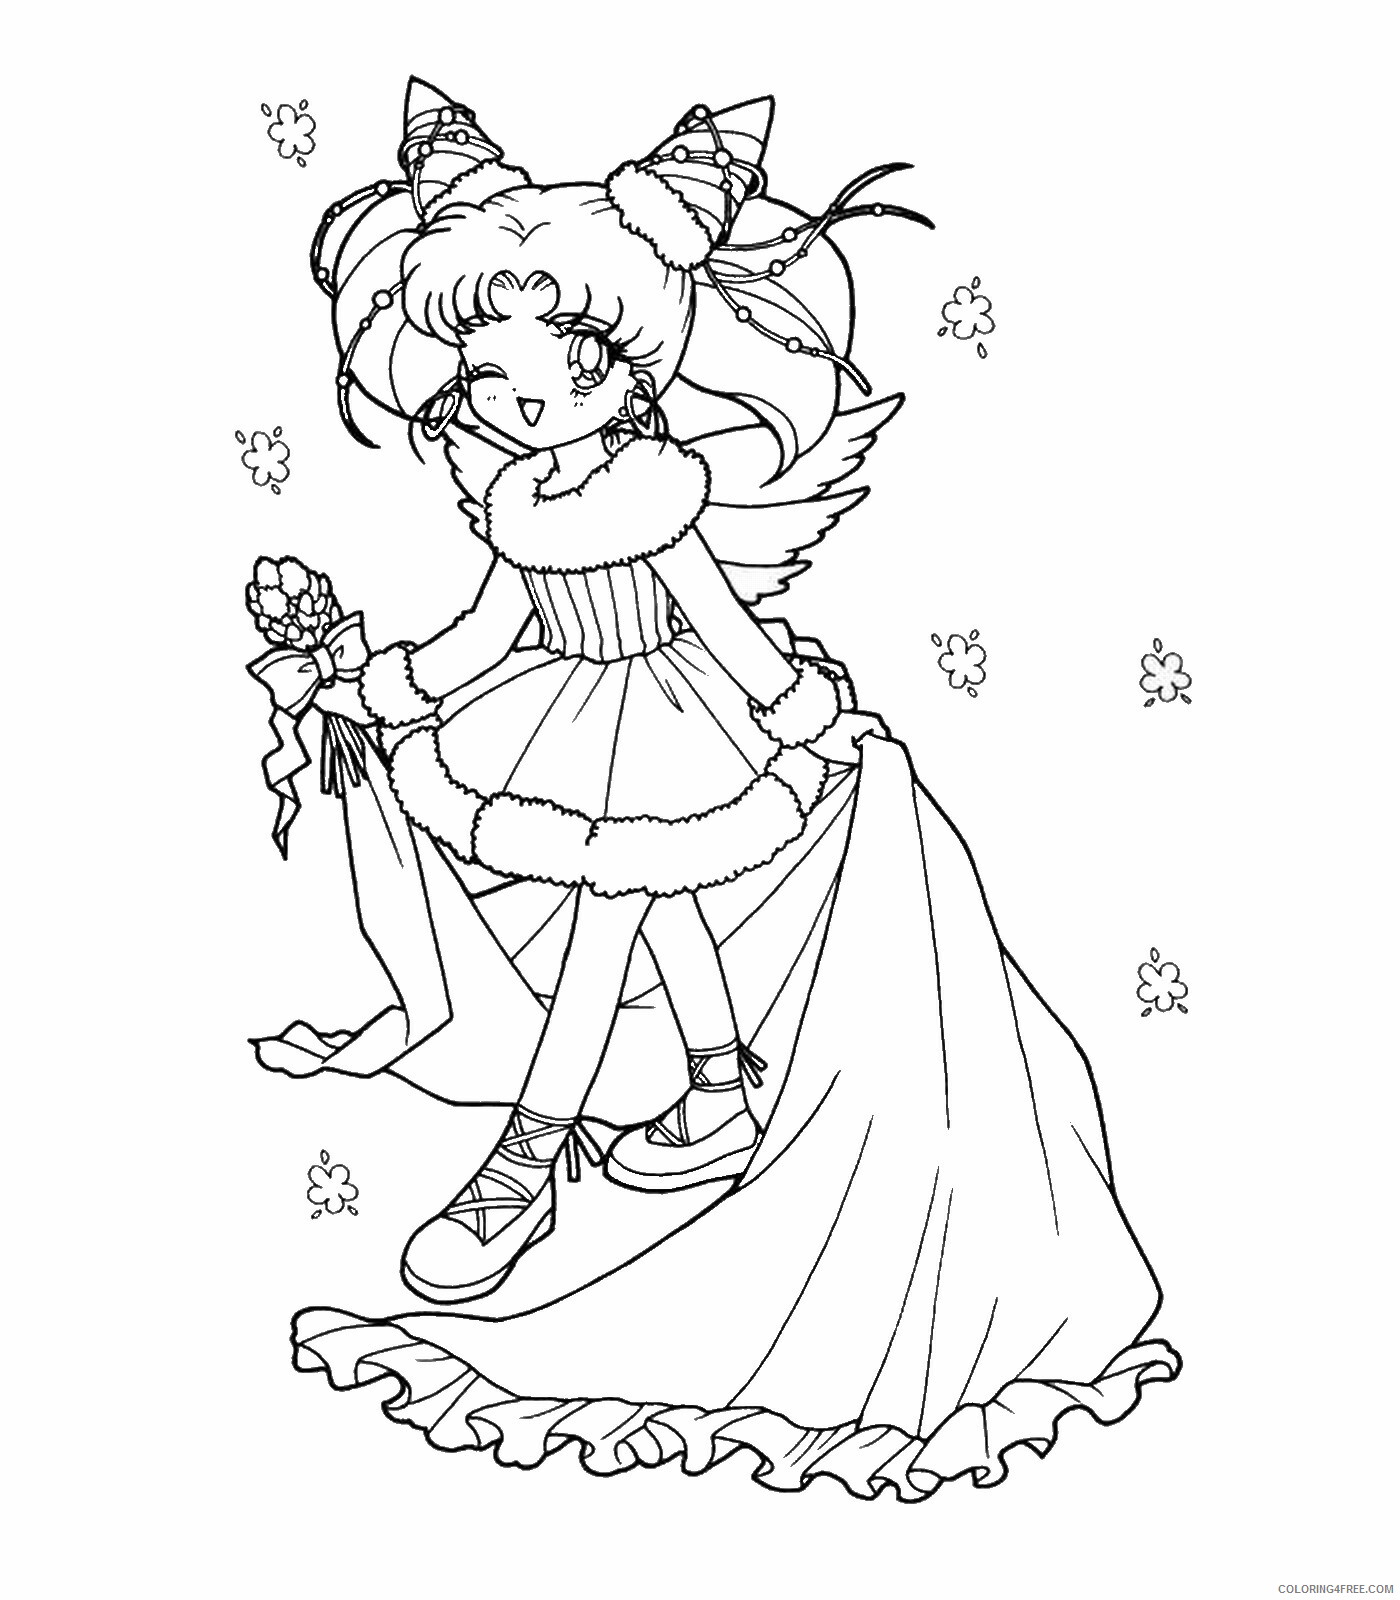 Sailor Moon Printable Coloring Pages Anime sailor_moon_cl06 2021 0972 Coloring4free